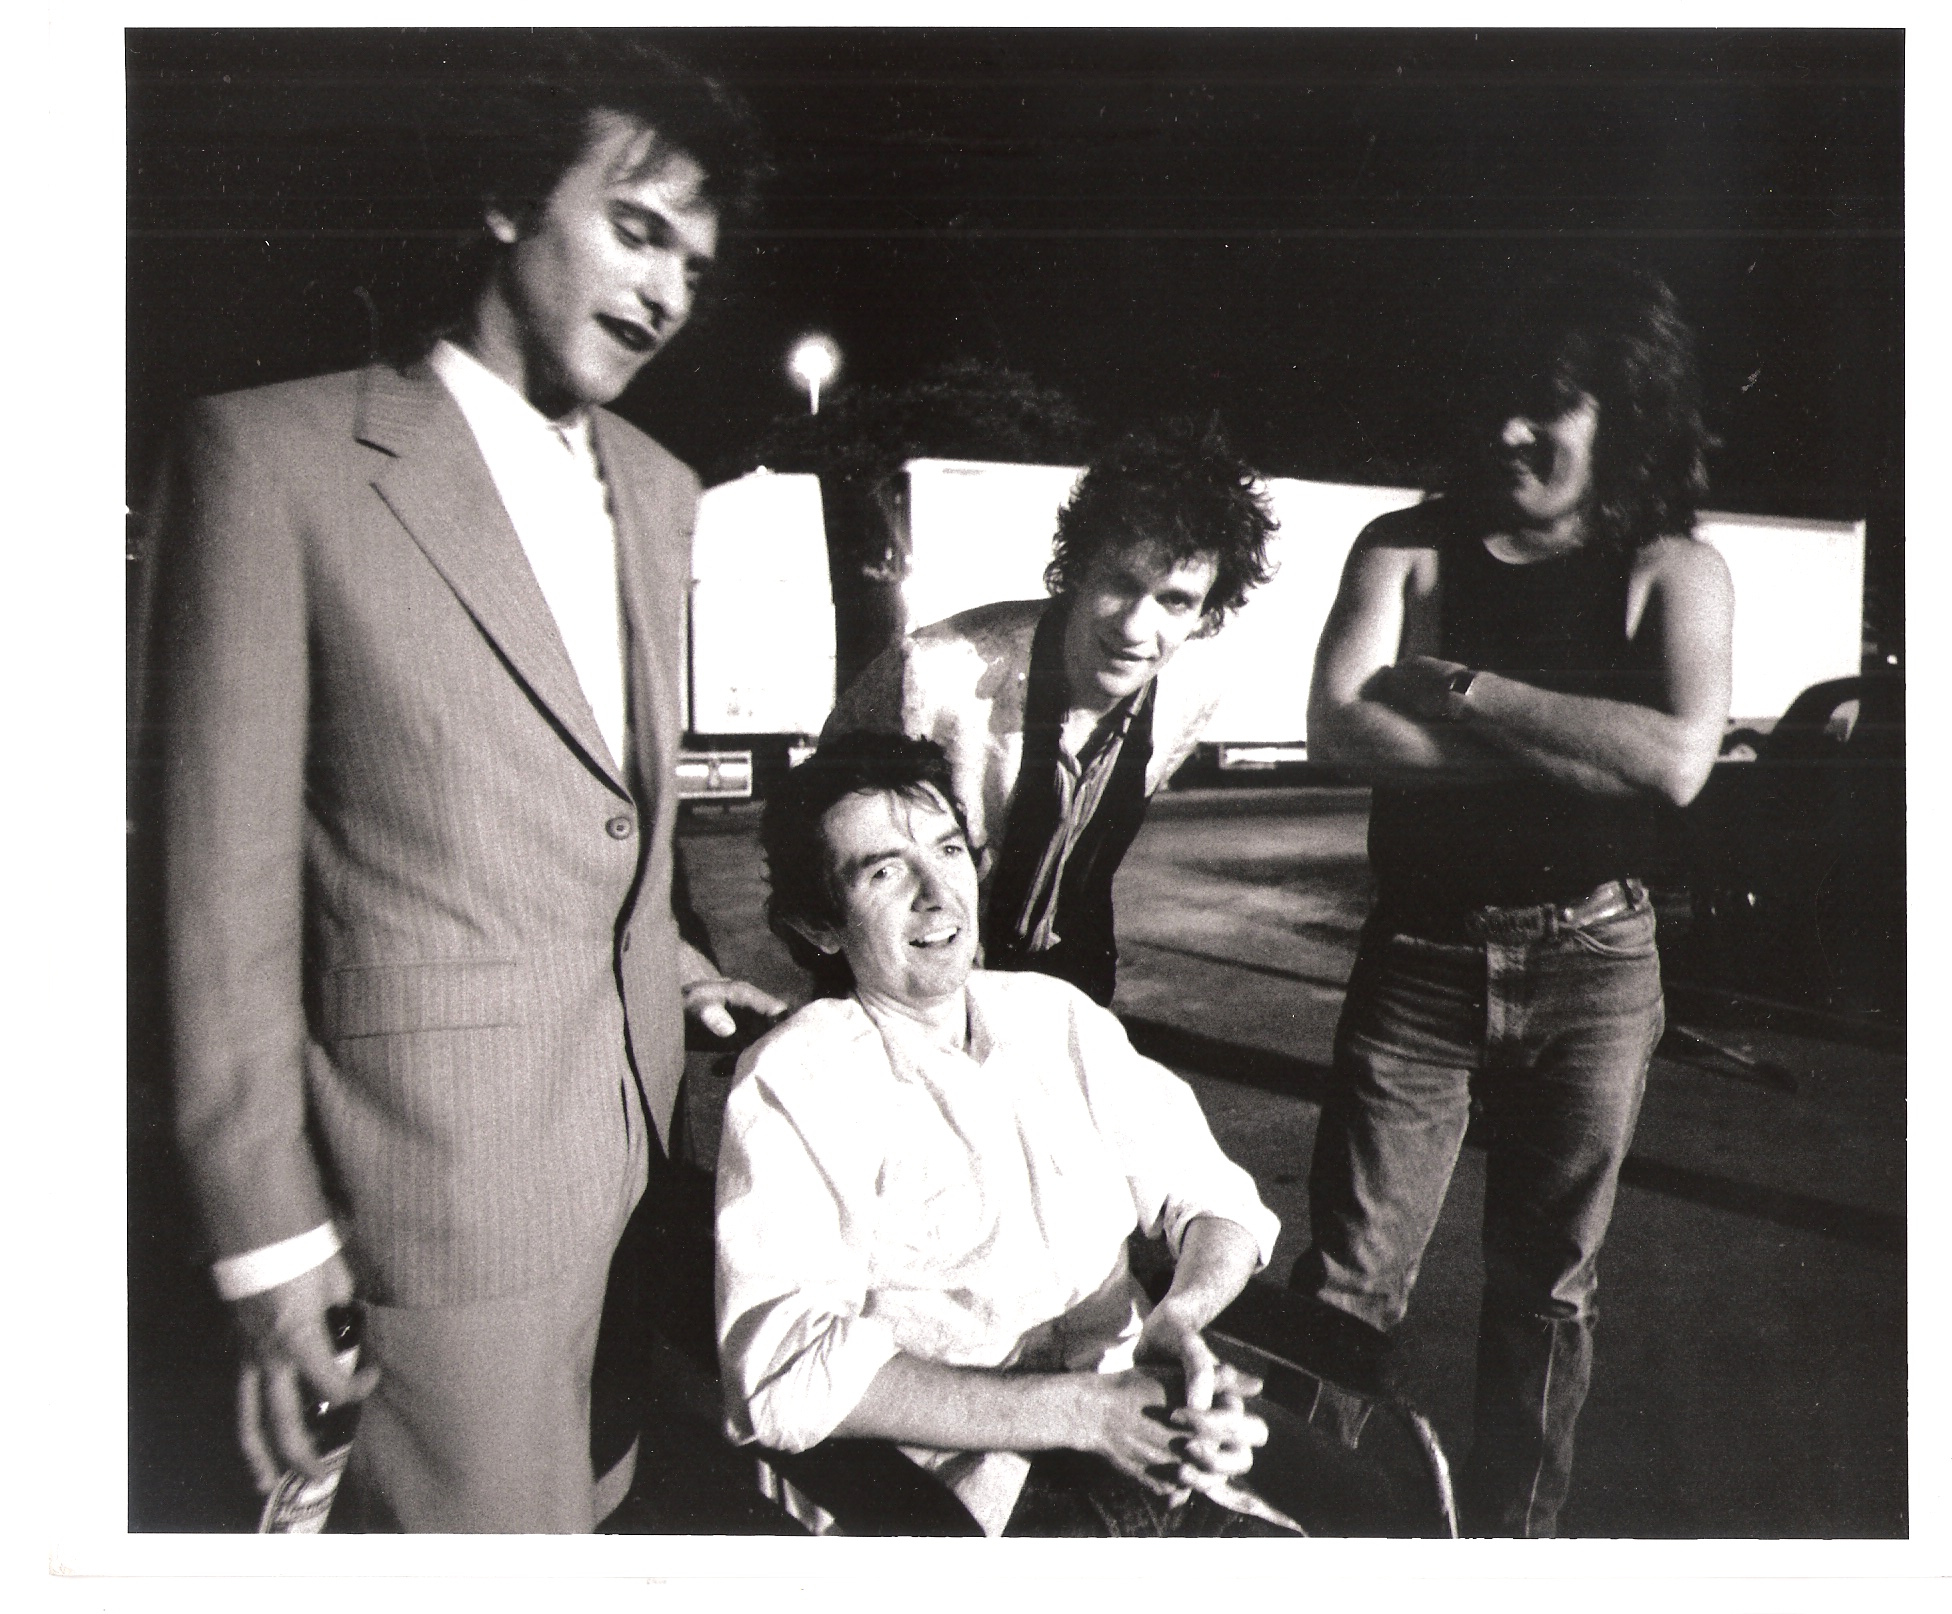 replacements_photo8X10_01.jpg